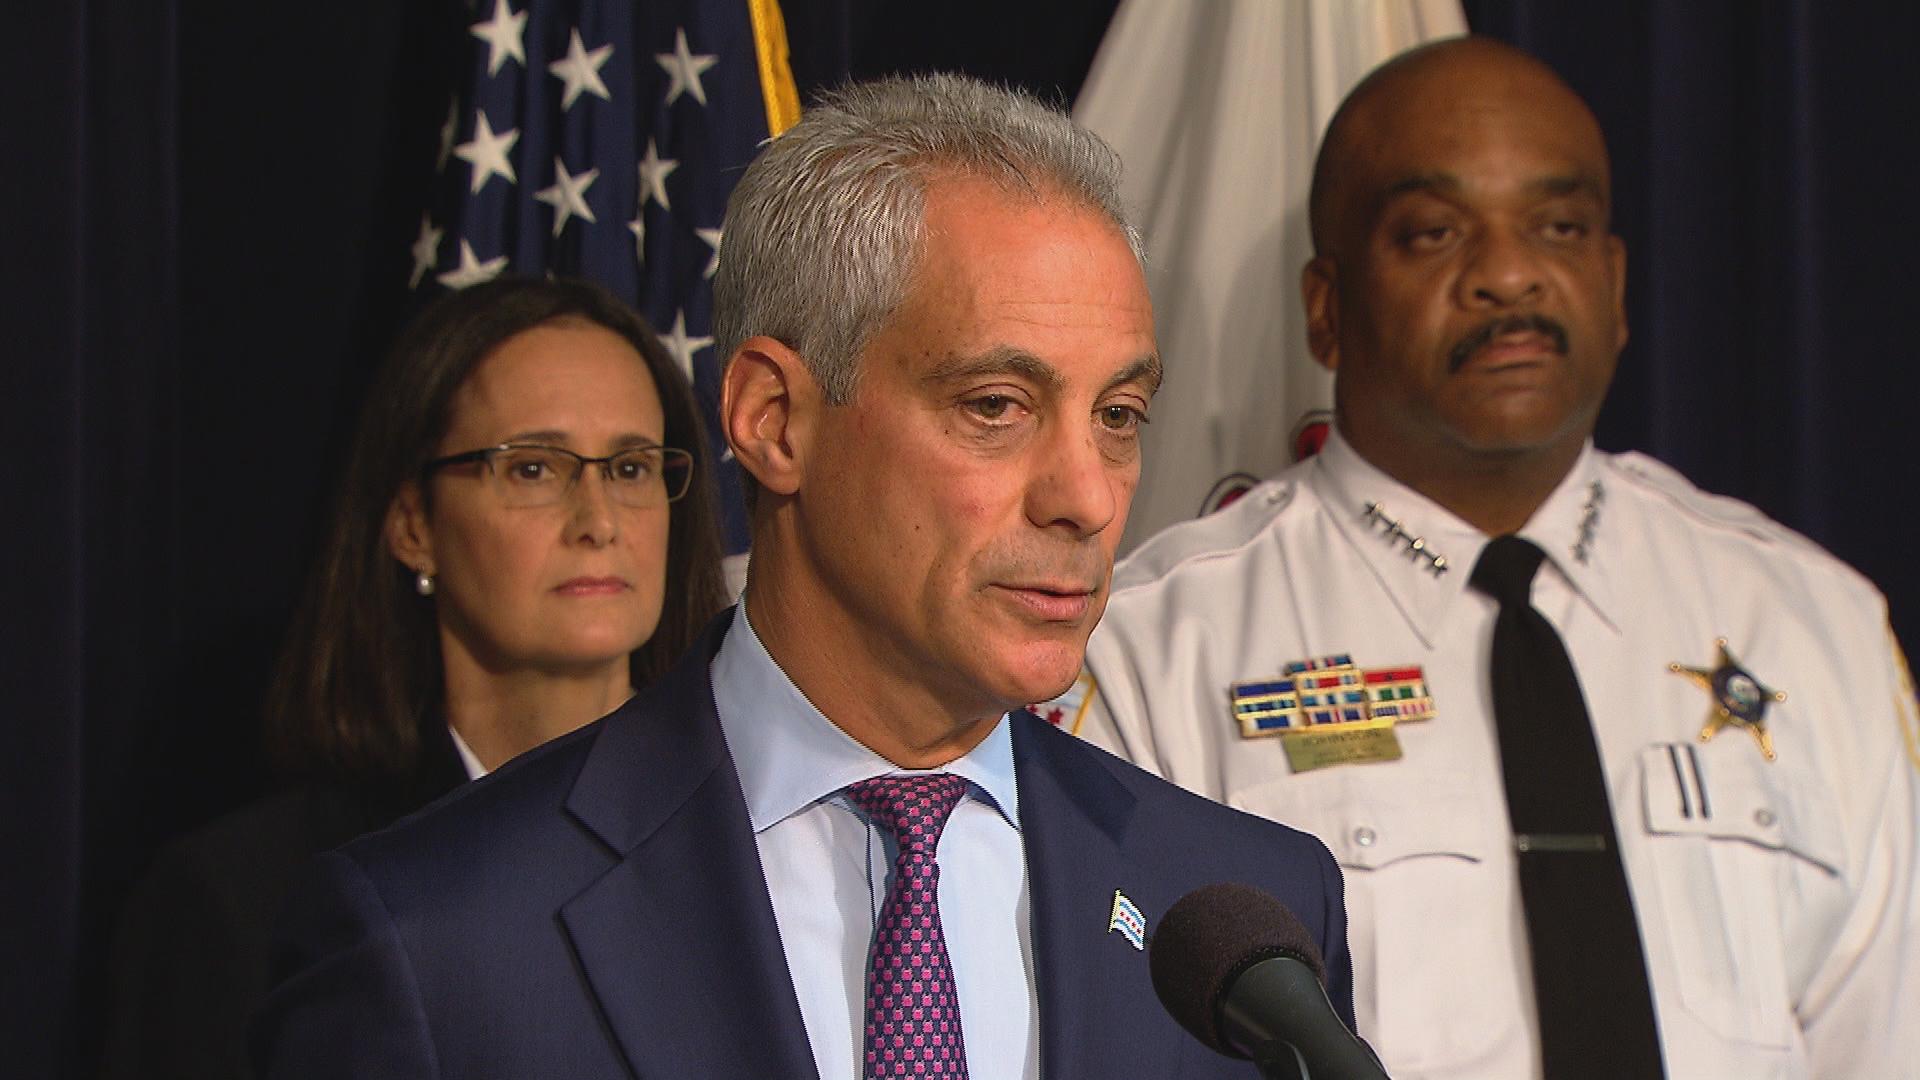 Mayor Rahm Emanuel, Illinois Attorney General Lisa Madigan and Chicago Police Superintendent Eddie Johnson discuss police reforms and oversight of the Chicago Police Department on Aug. 29, 2017.